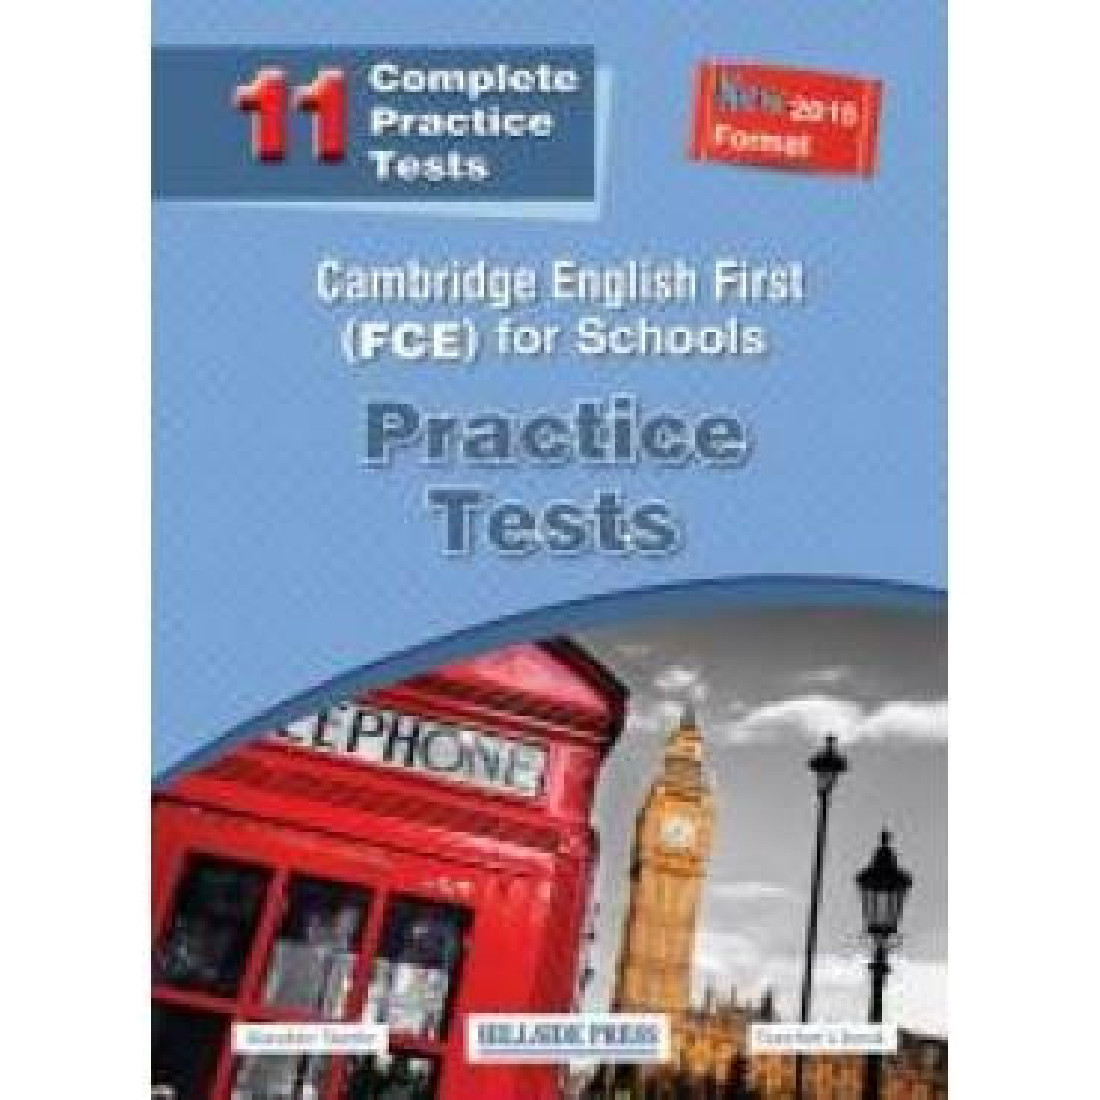 CAMBRIDGE ENGLISH FIRST FOR SCHOOLS PRACTICE TESTS TCHRS (11 TESTS)NEW 2015 FORMAT